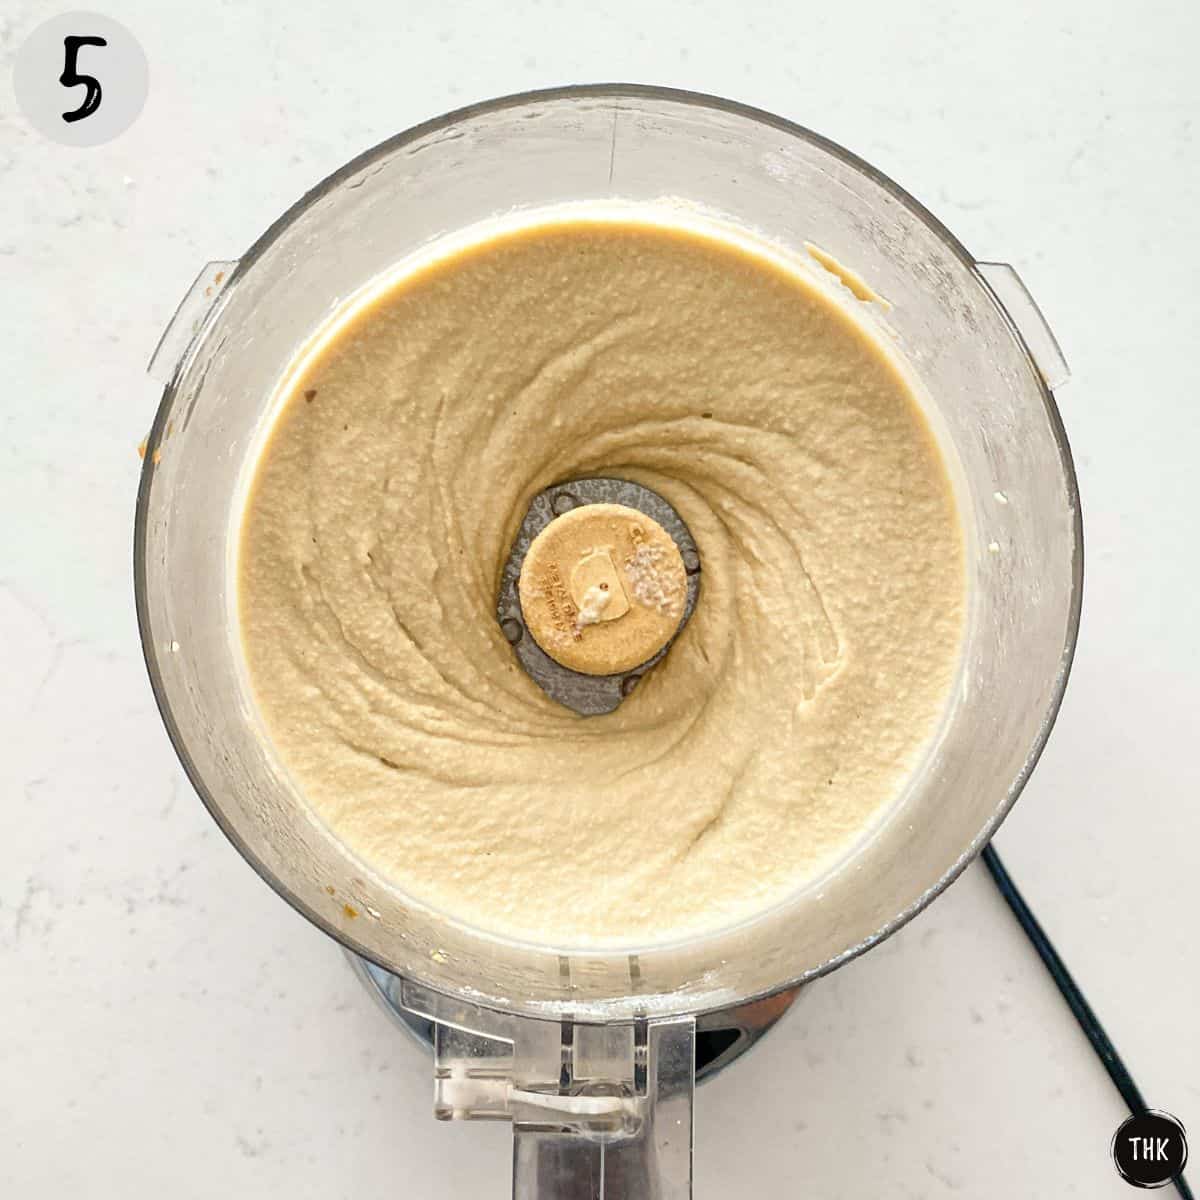 Creamy white pureed mixture inside bowl of food processor.